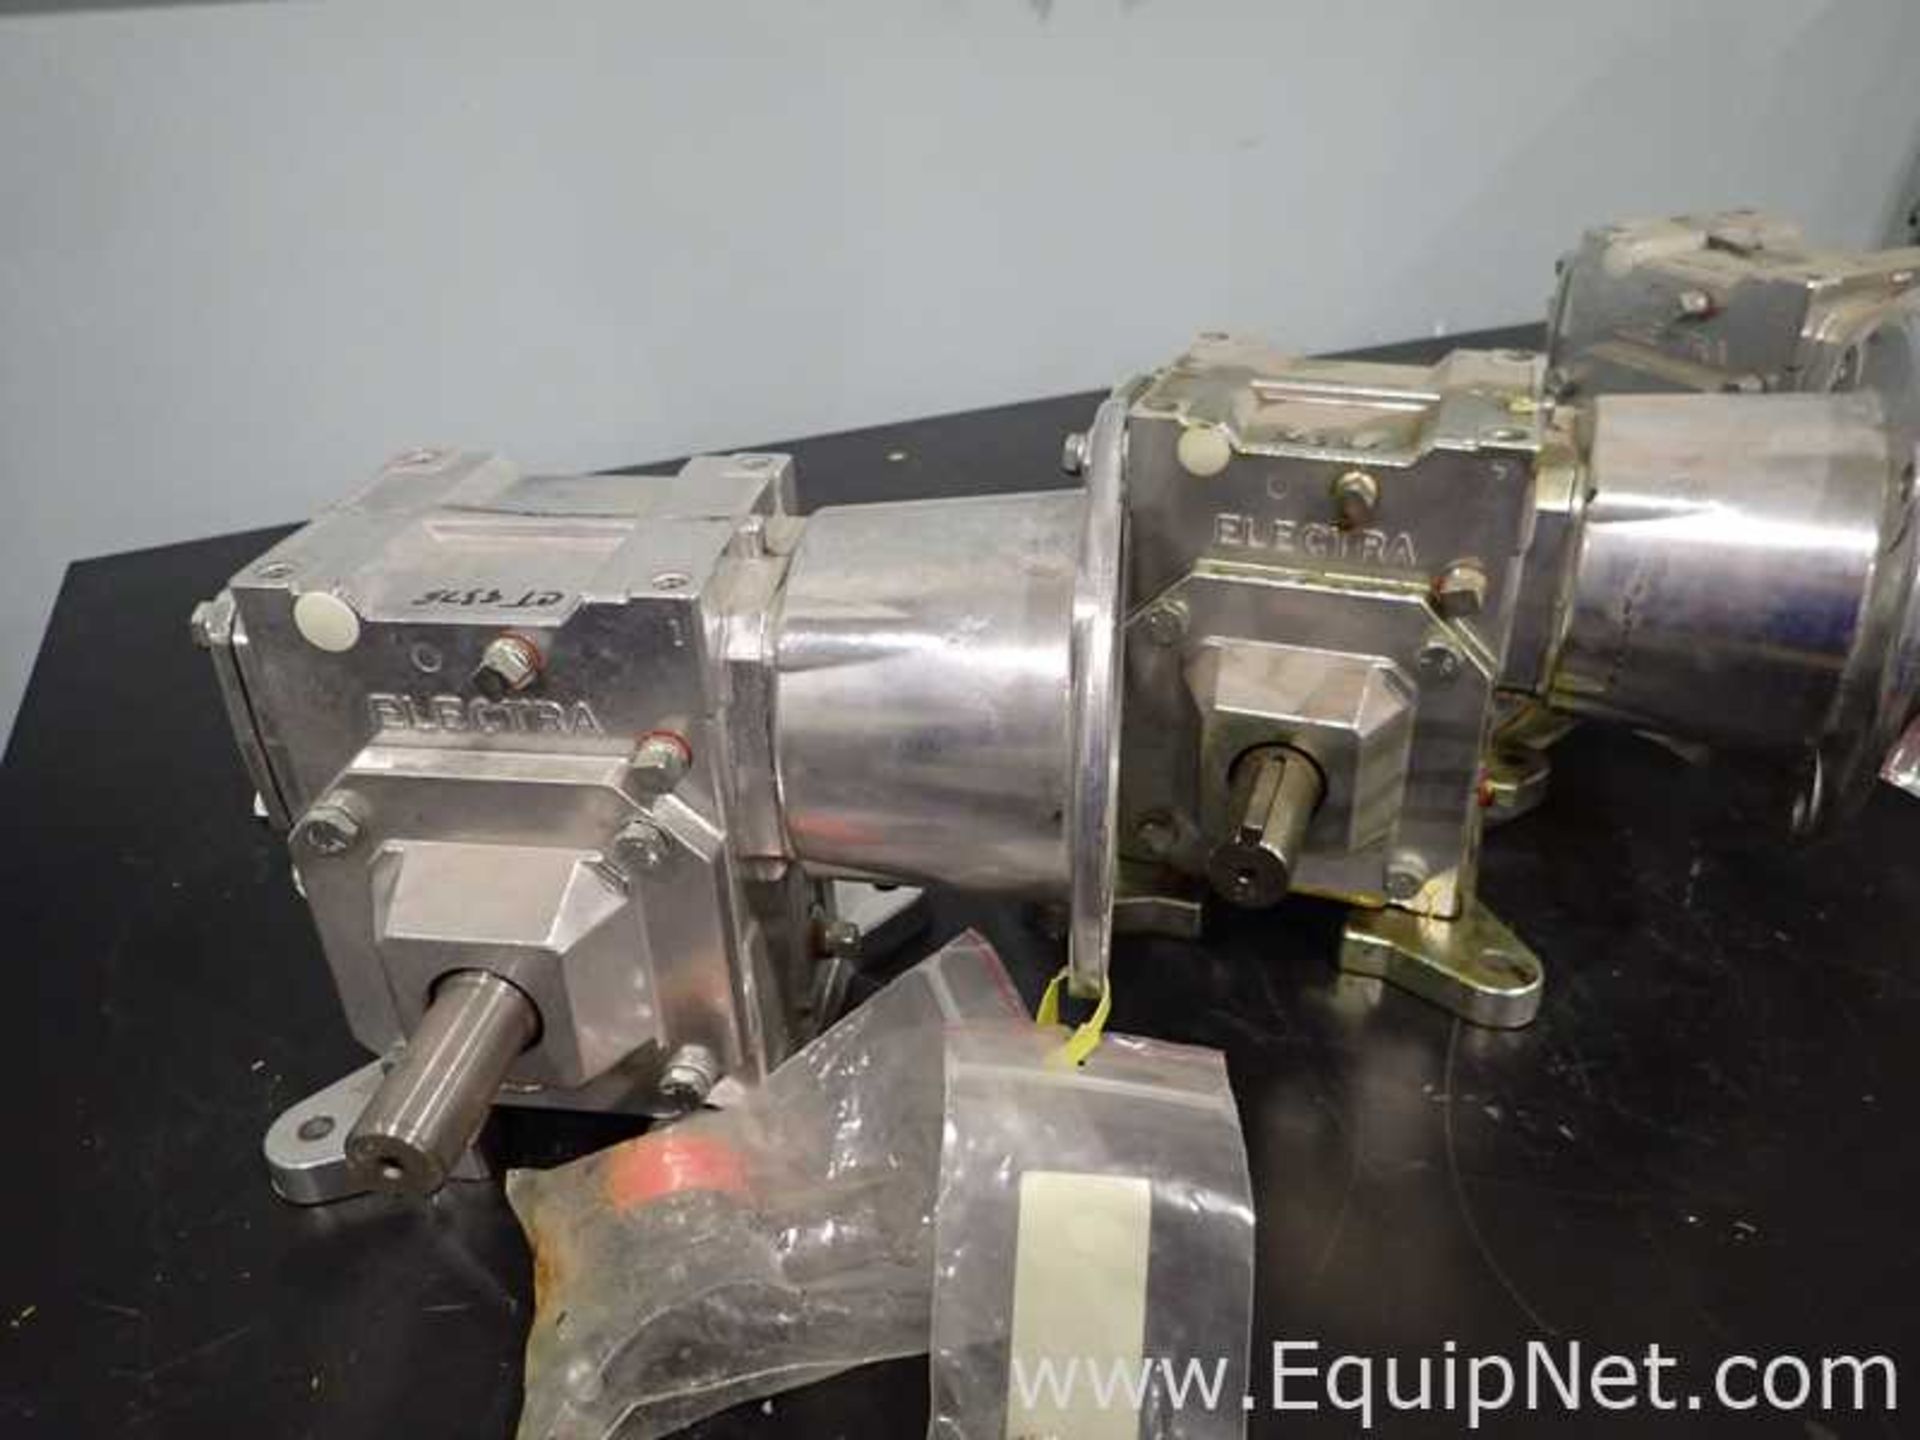 EQUIPNET LISTING #793366; REMOVAL COST: $25; DESCRIPTION: Lot of 4 Various Electra Gear Gear Boxes - Image 4 of 8